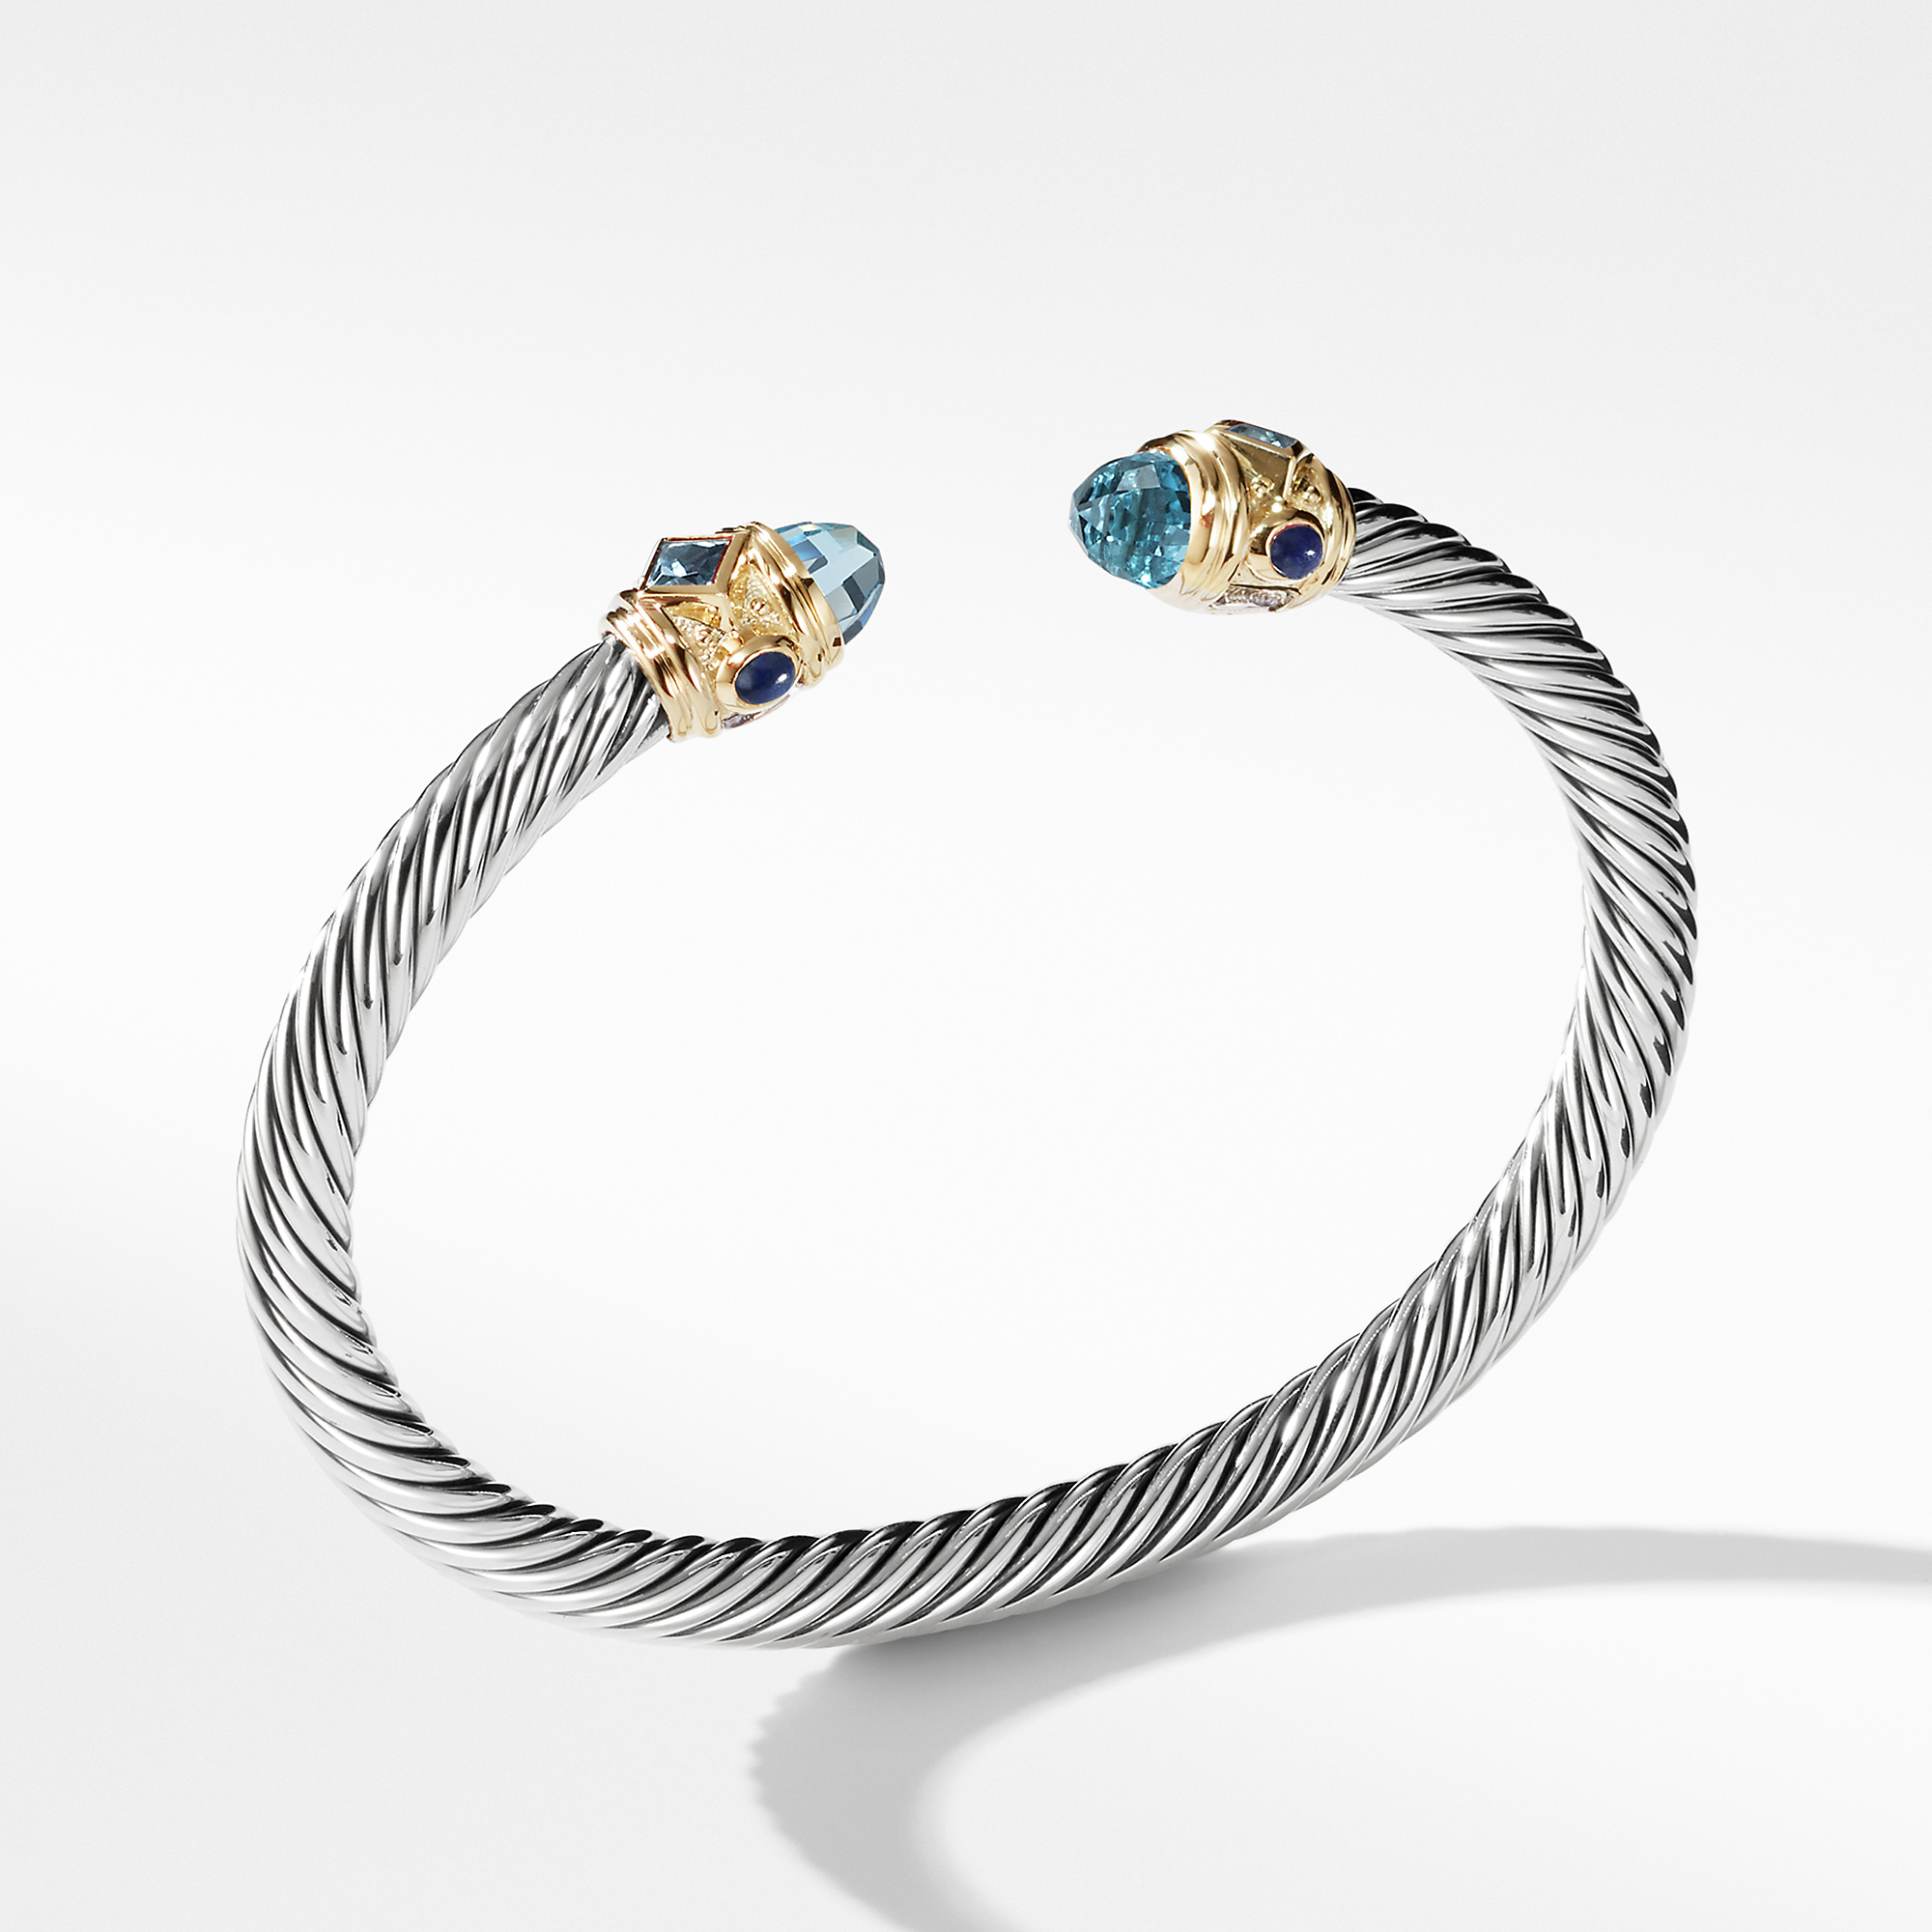 Renaissance Bracelet in Sterling Silver with Blue Topaz, Lapis and 14K Yellow Gold